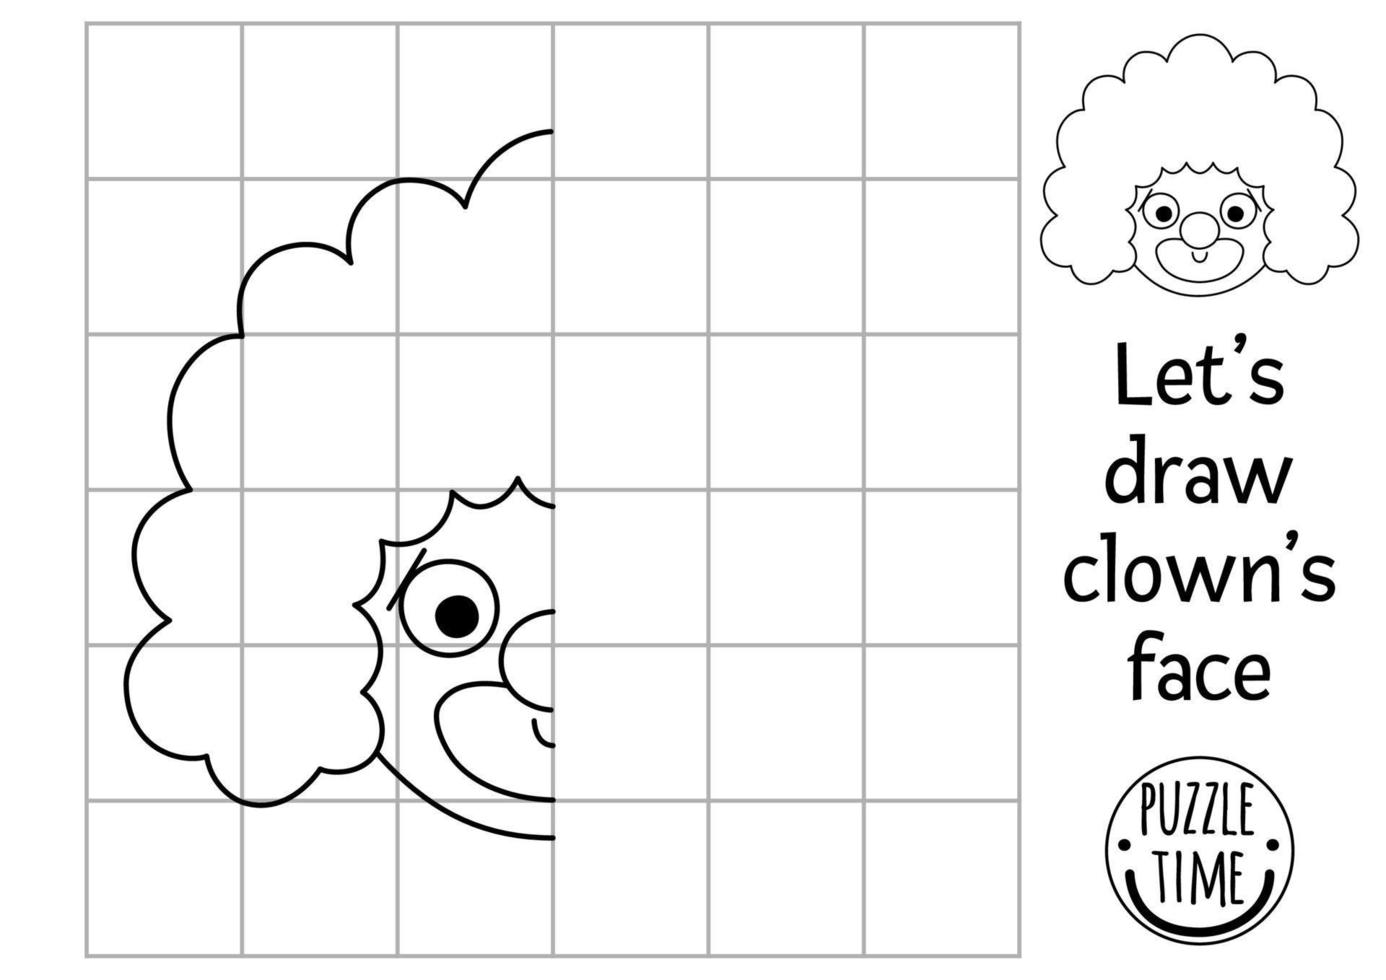 Complete the clown face picture. Vector circus symmetrical drawing practice worksheet. Printable black and white activity for preschool kids. Copy the picture entertainment festival themed game